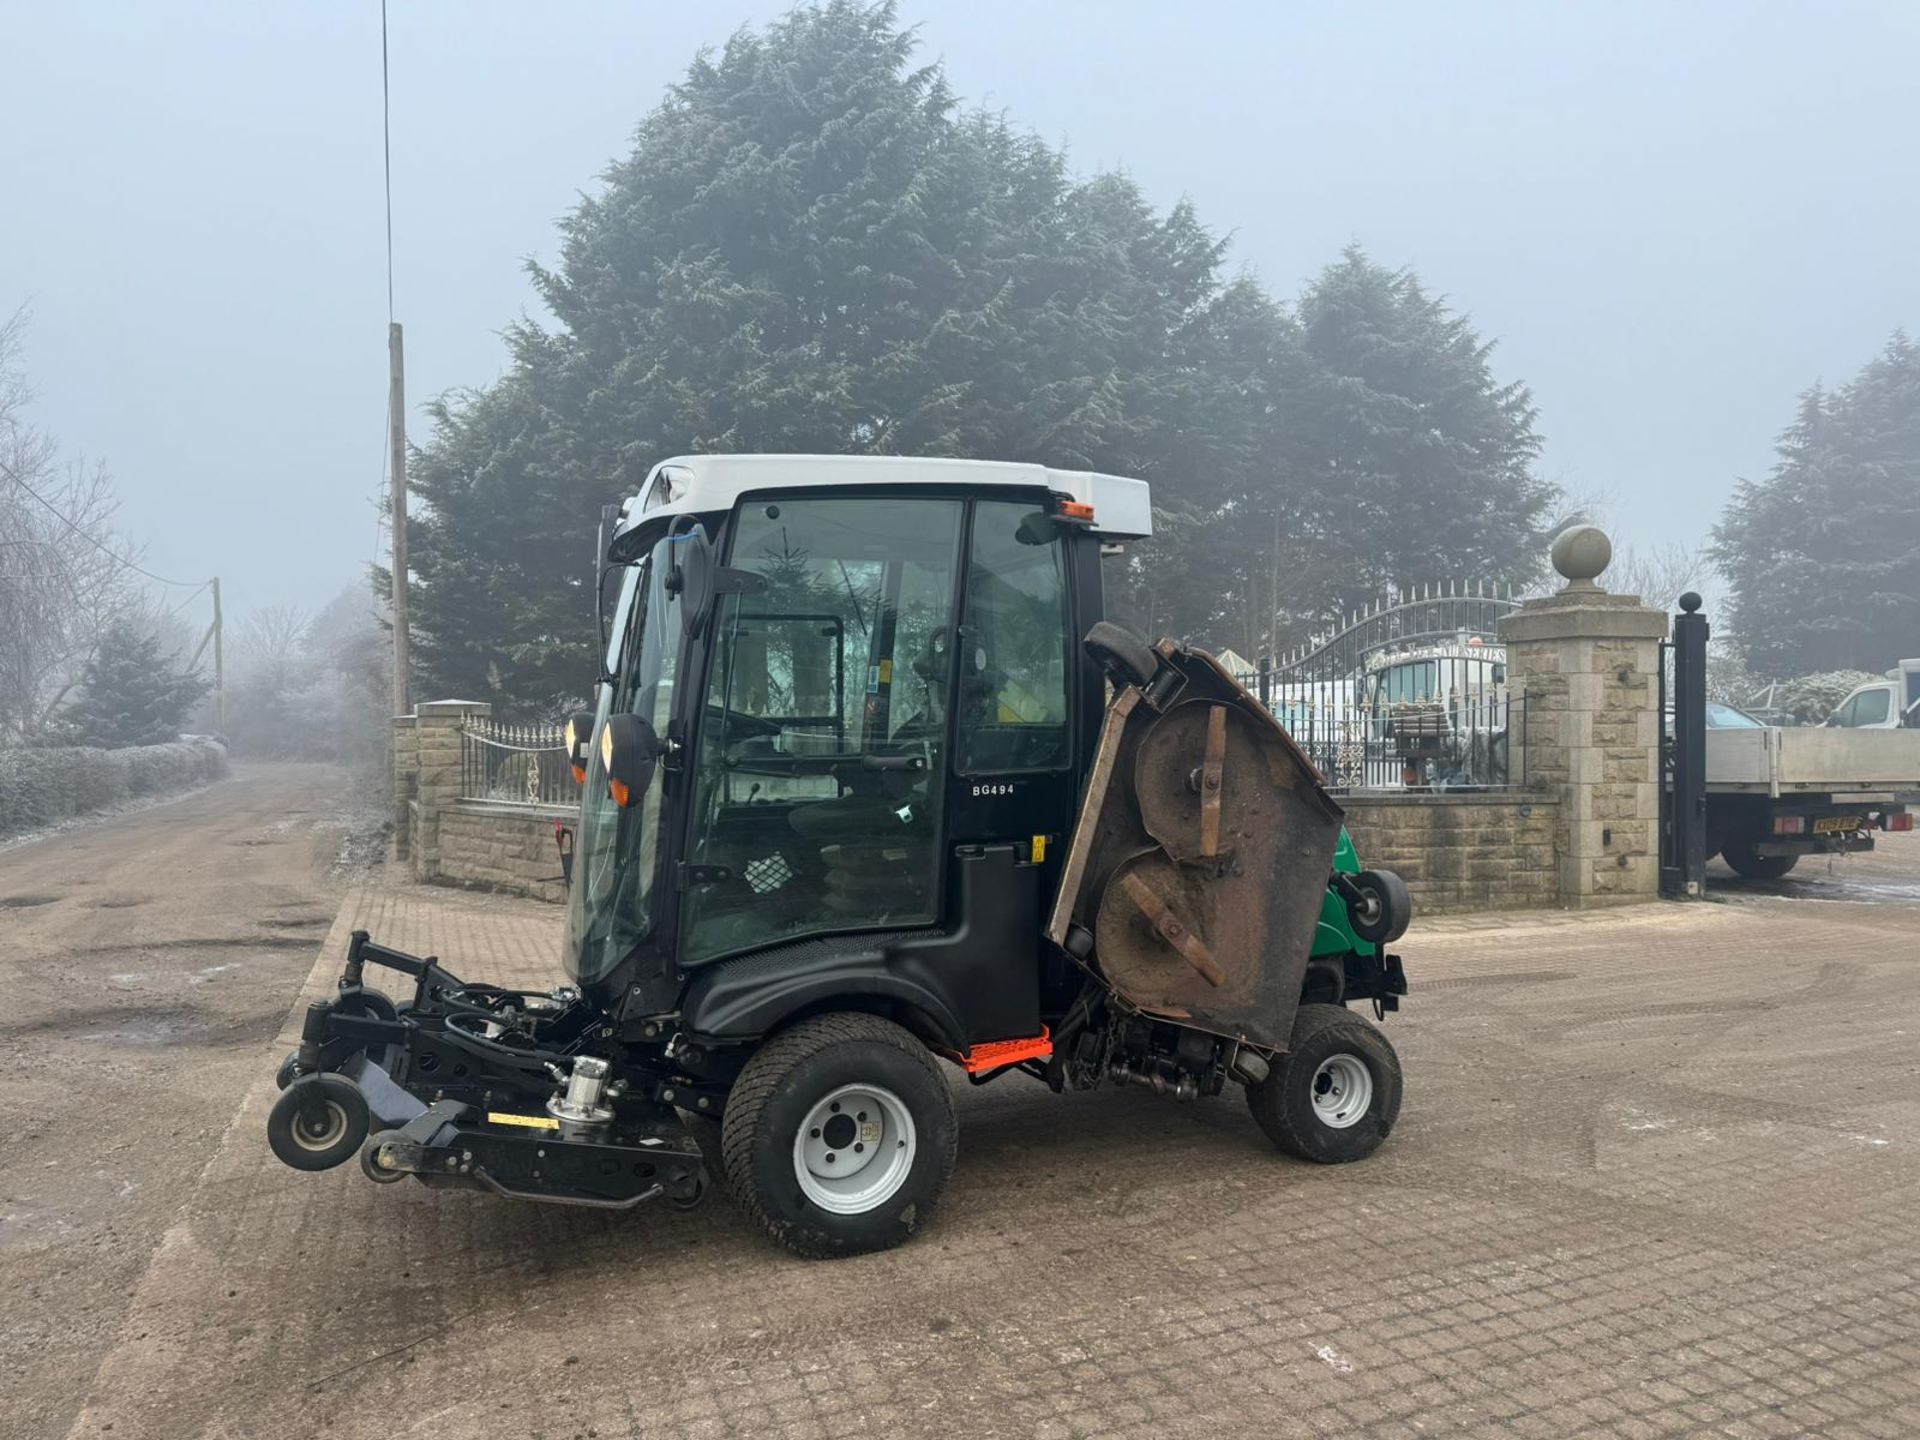 2016 RANSOMES RMP493 BATWING RIDE ON LAWN MOWER WITH FULL GLASS CAB *PLUS VAT* - Image 7 of 33